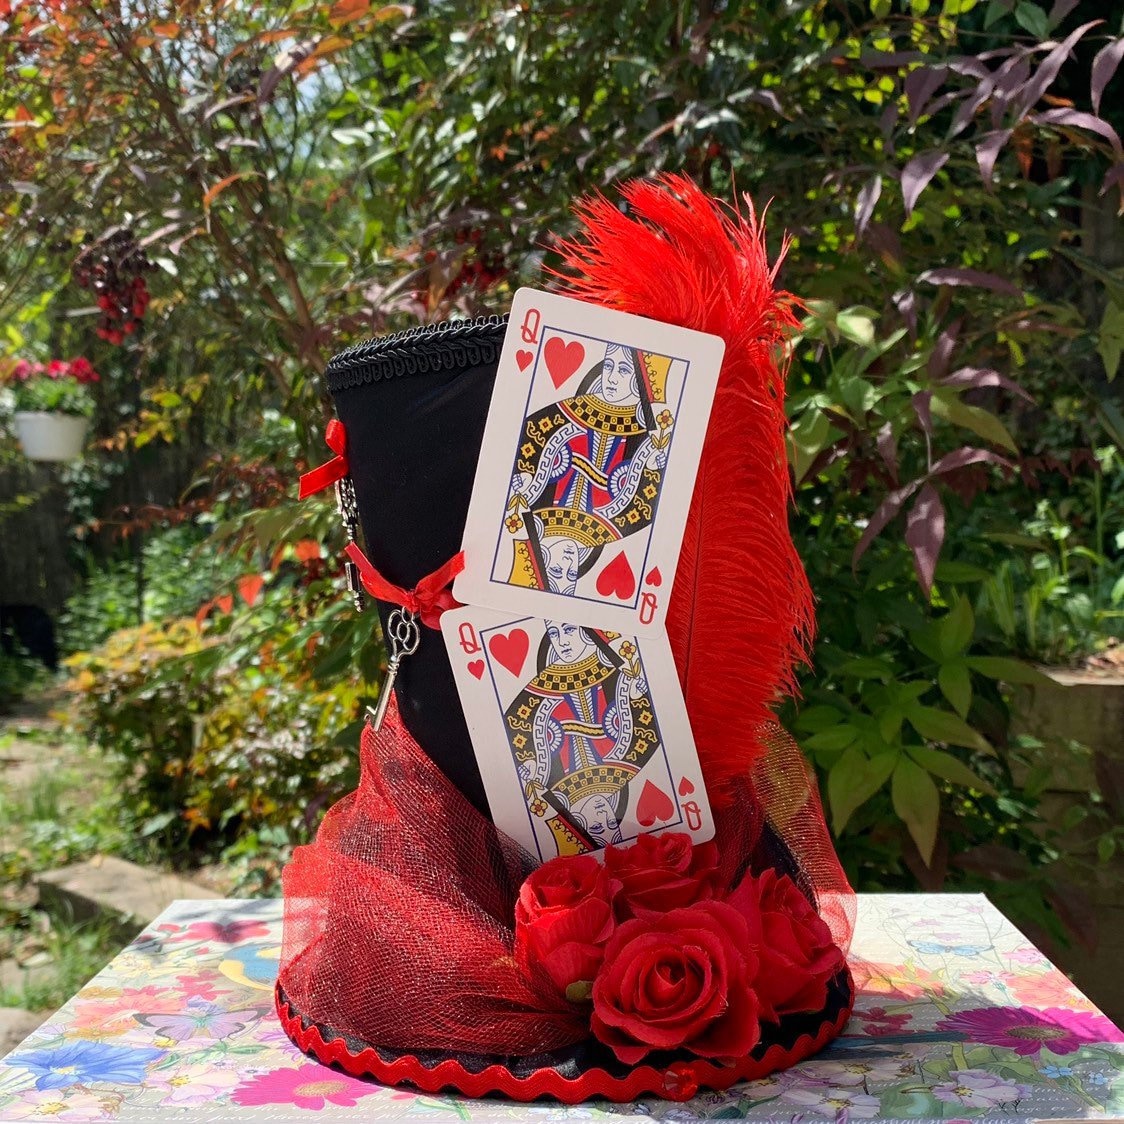  Serenity Fair Alice in Wonderland (Mad Hatter Tea Party Props)  Queen of Hearts Hanging Heart, Arrow Signs. Re useable Birthday Tea Party  Decorations